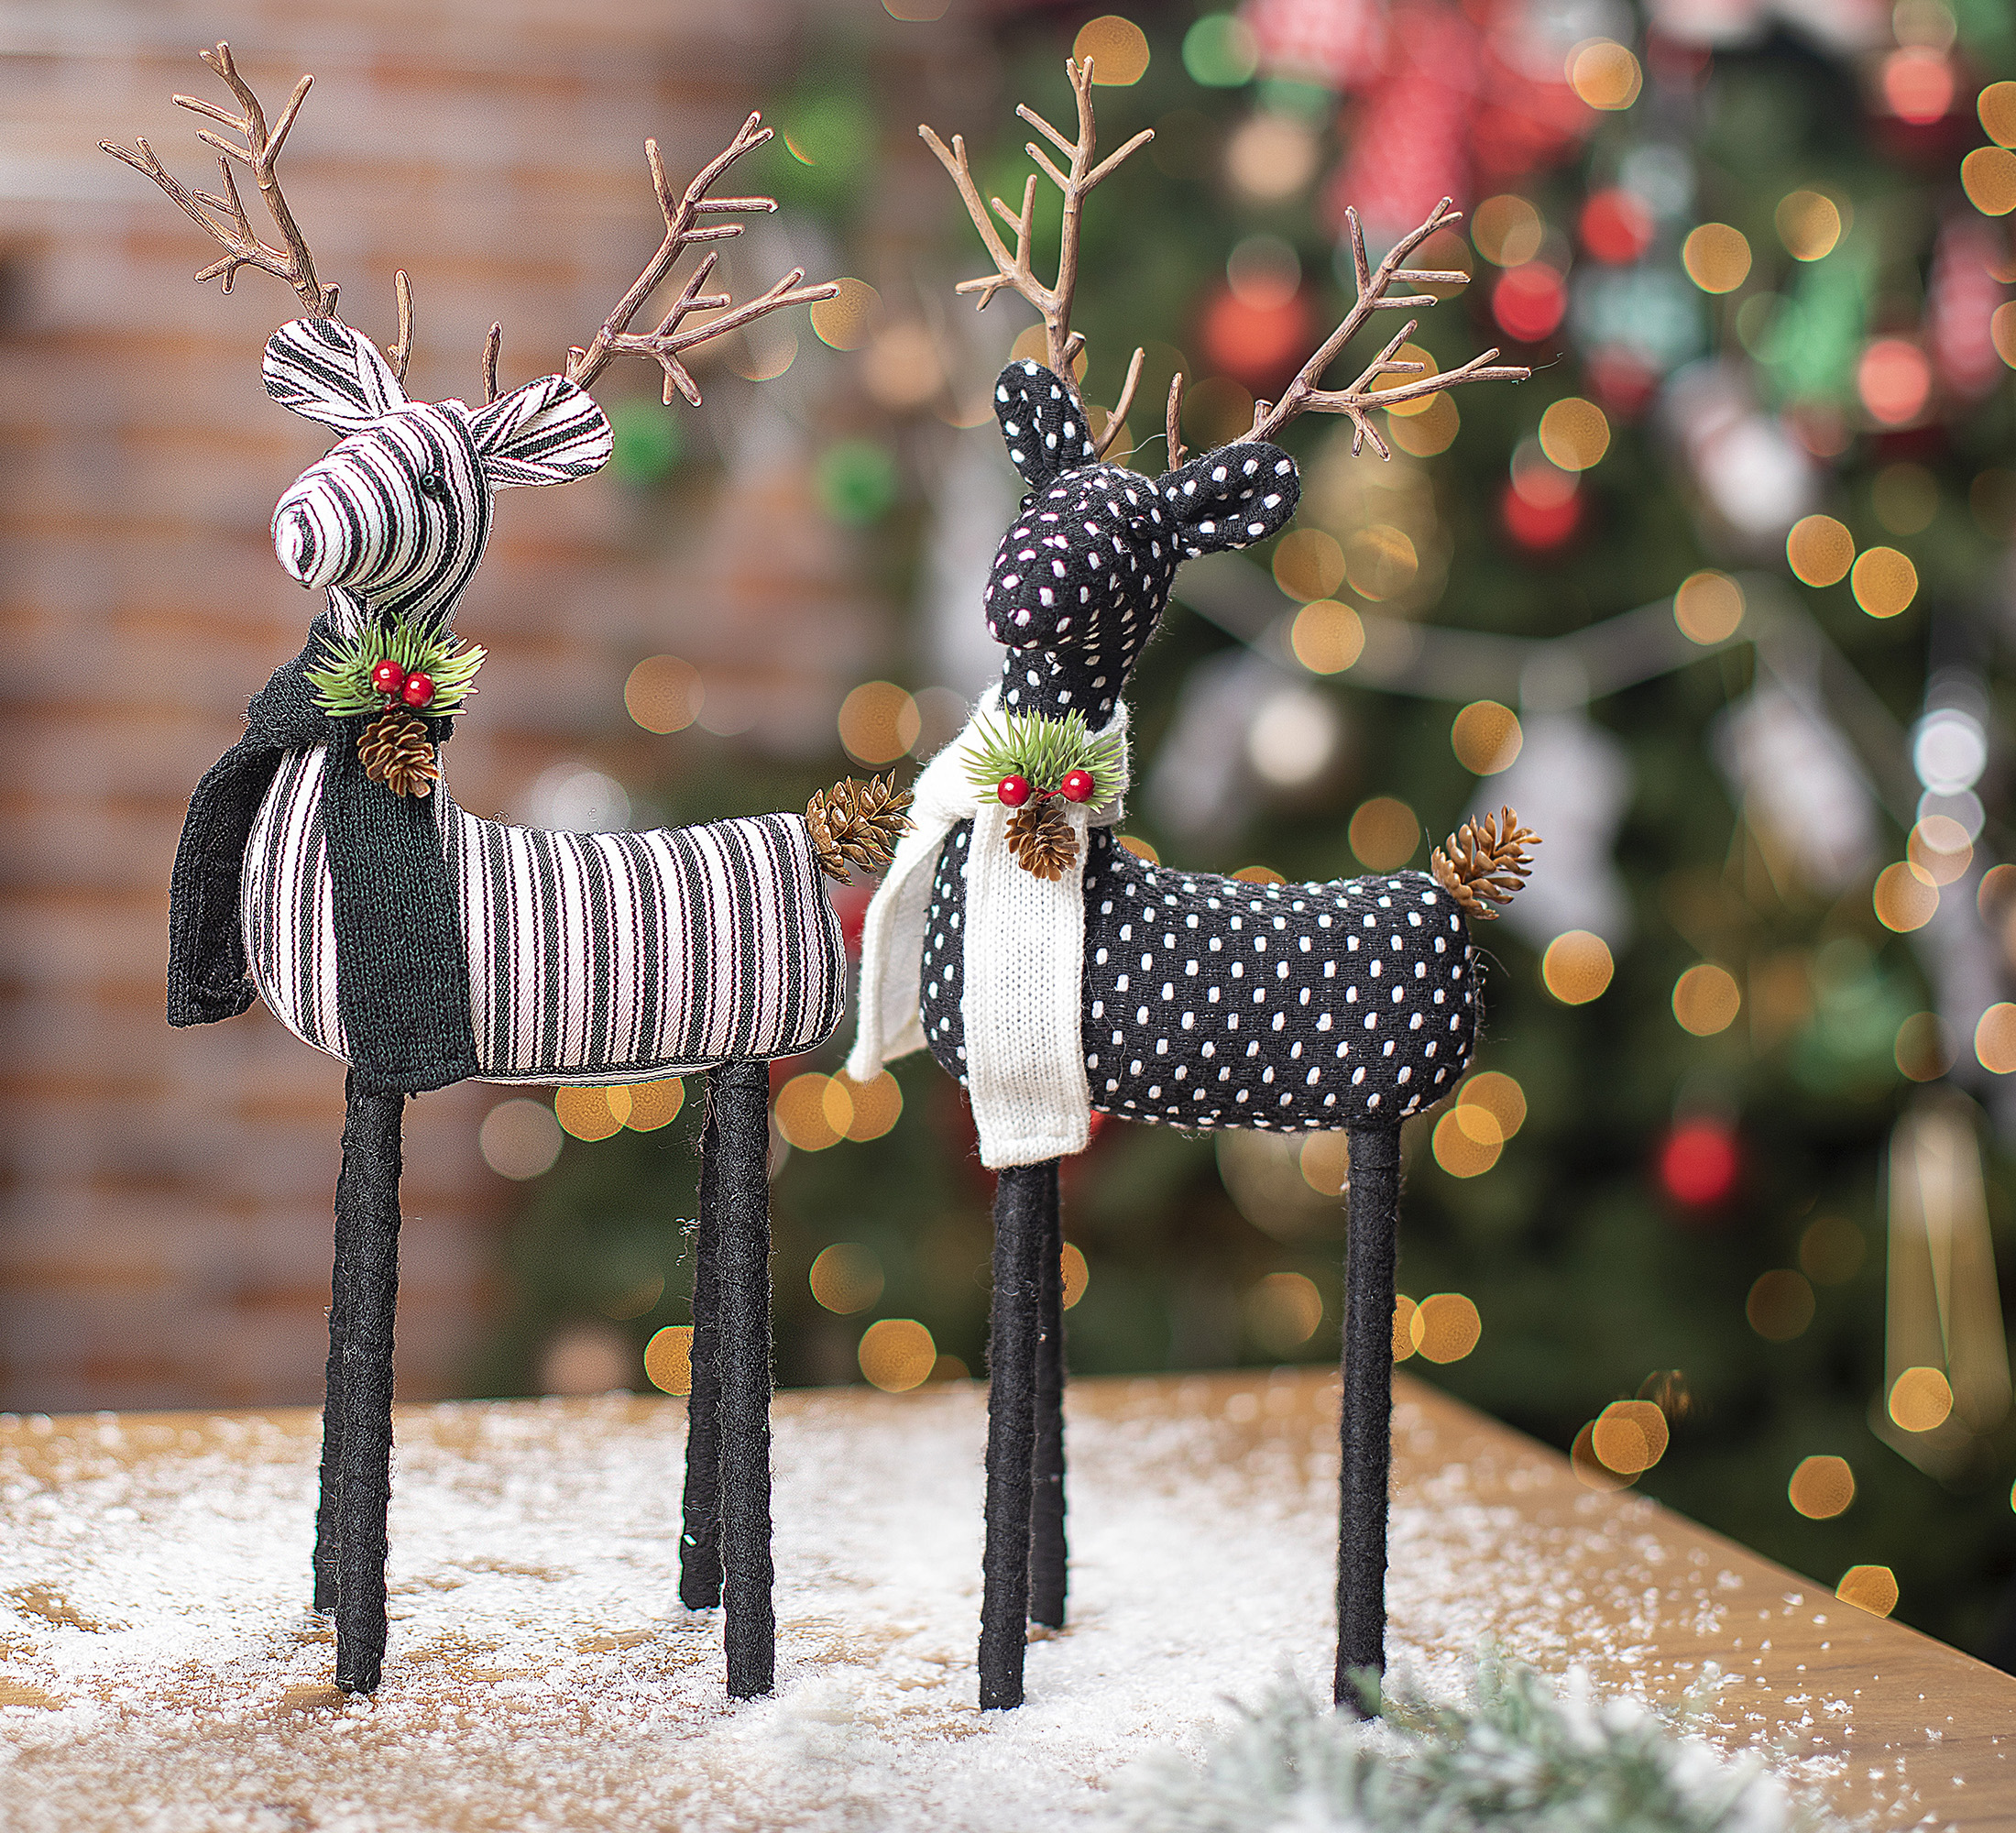 Holiday Time Large Fabric Black & White Deer Set of 2; Tabletop Christmas Décor - image 1 of 11